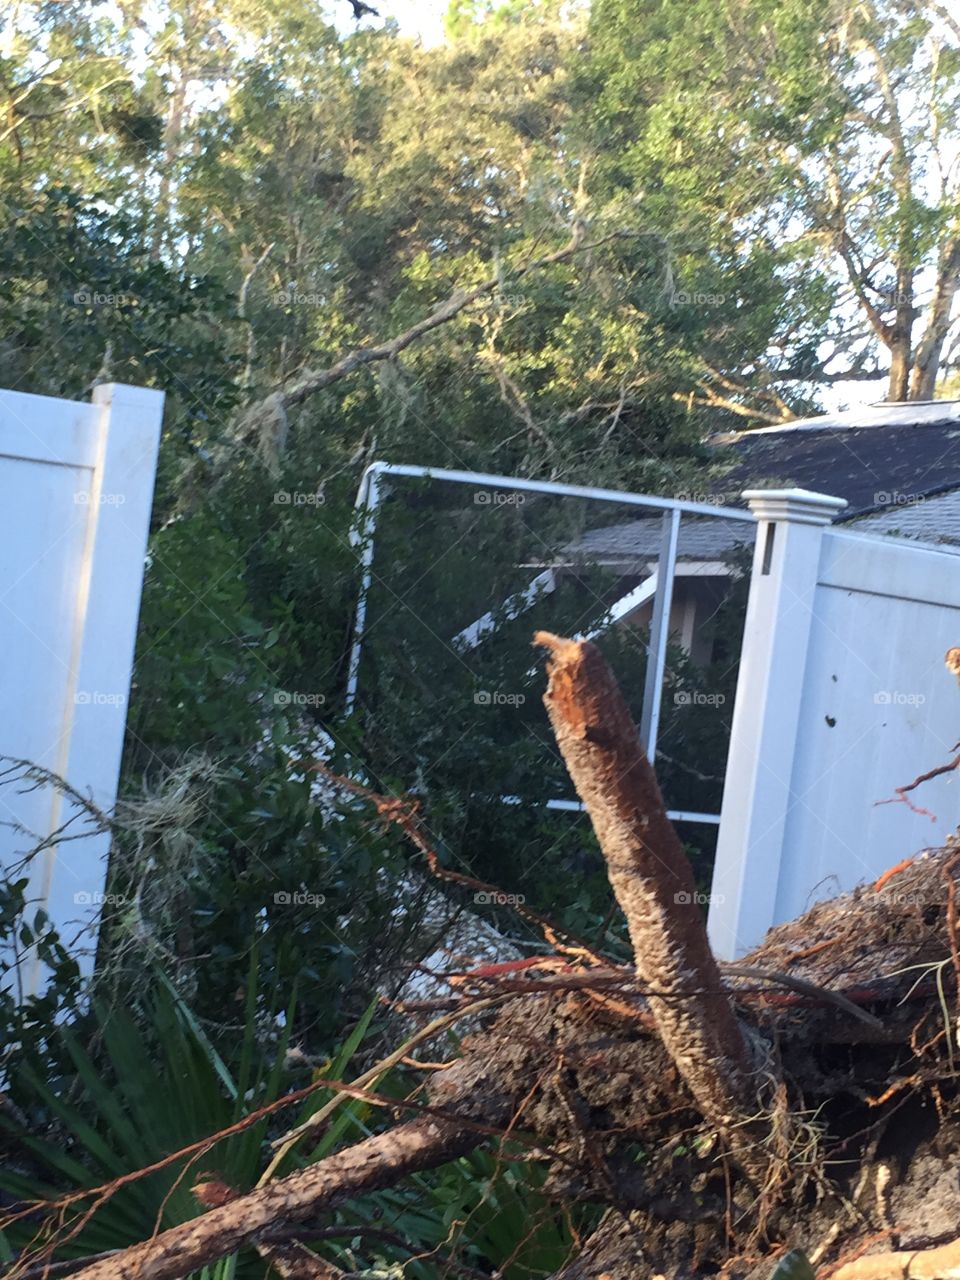 Hurricane Matthew downed many large oak trees in the northeast Florida city of Ormond Beach, crushing this fence and screened-in pool in a heavily hit neighborhood in Volusia County.